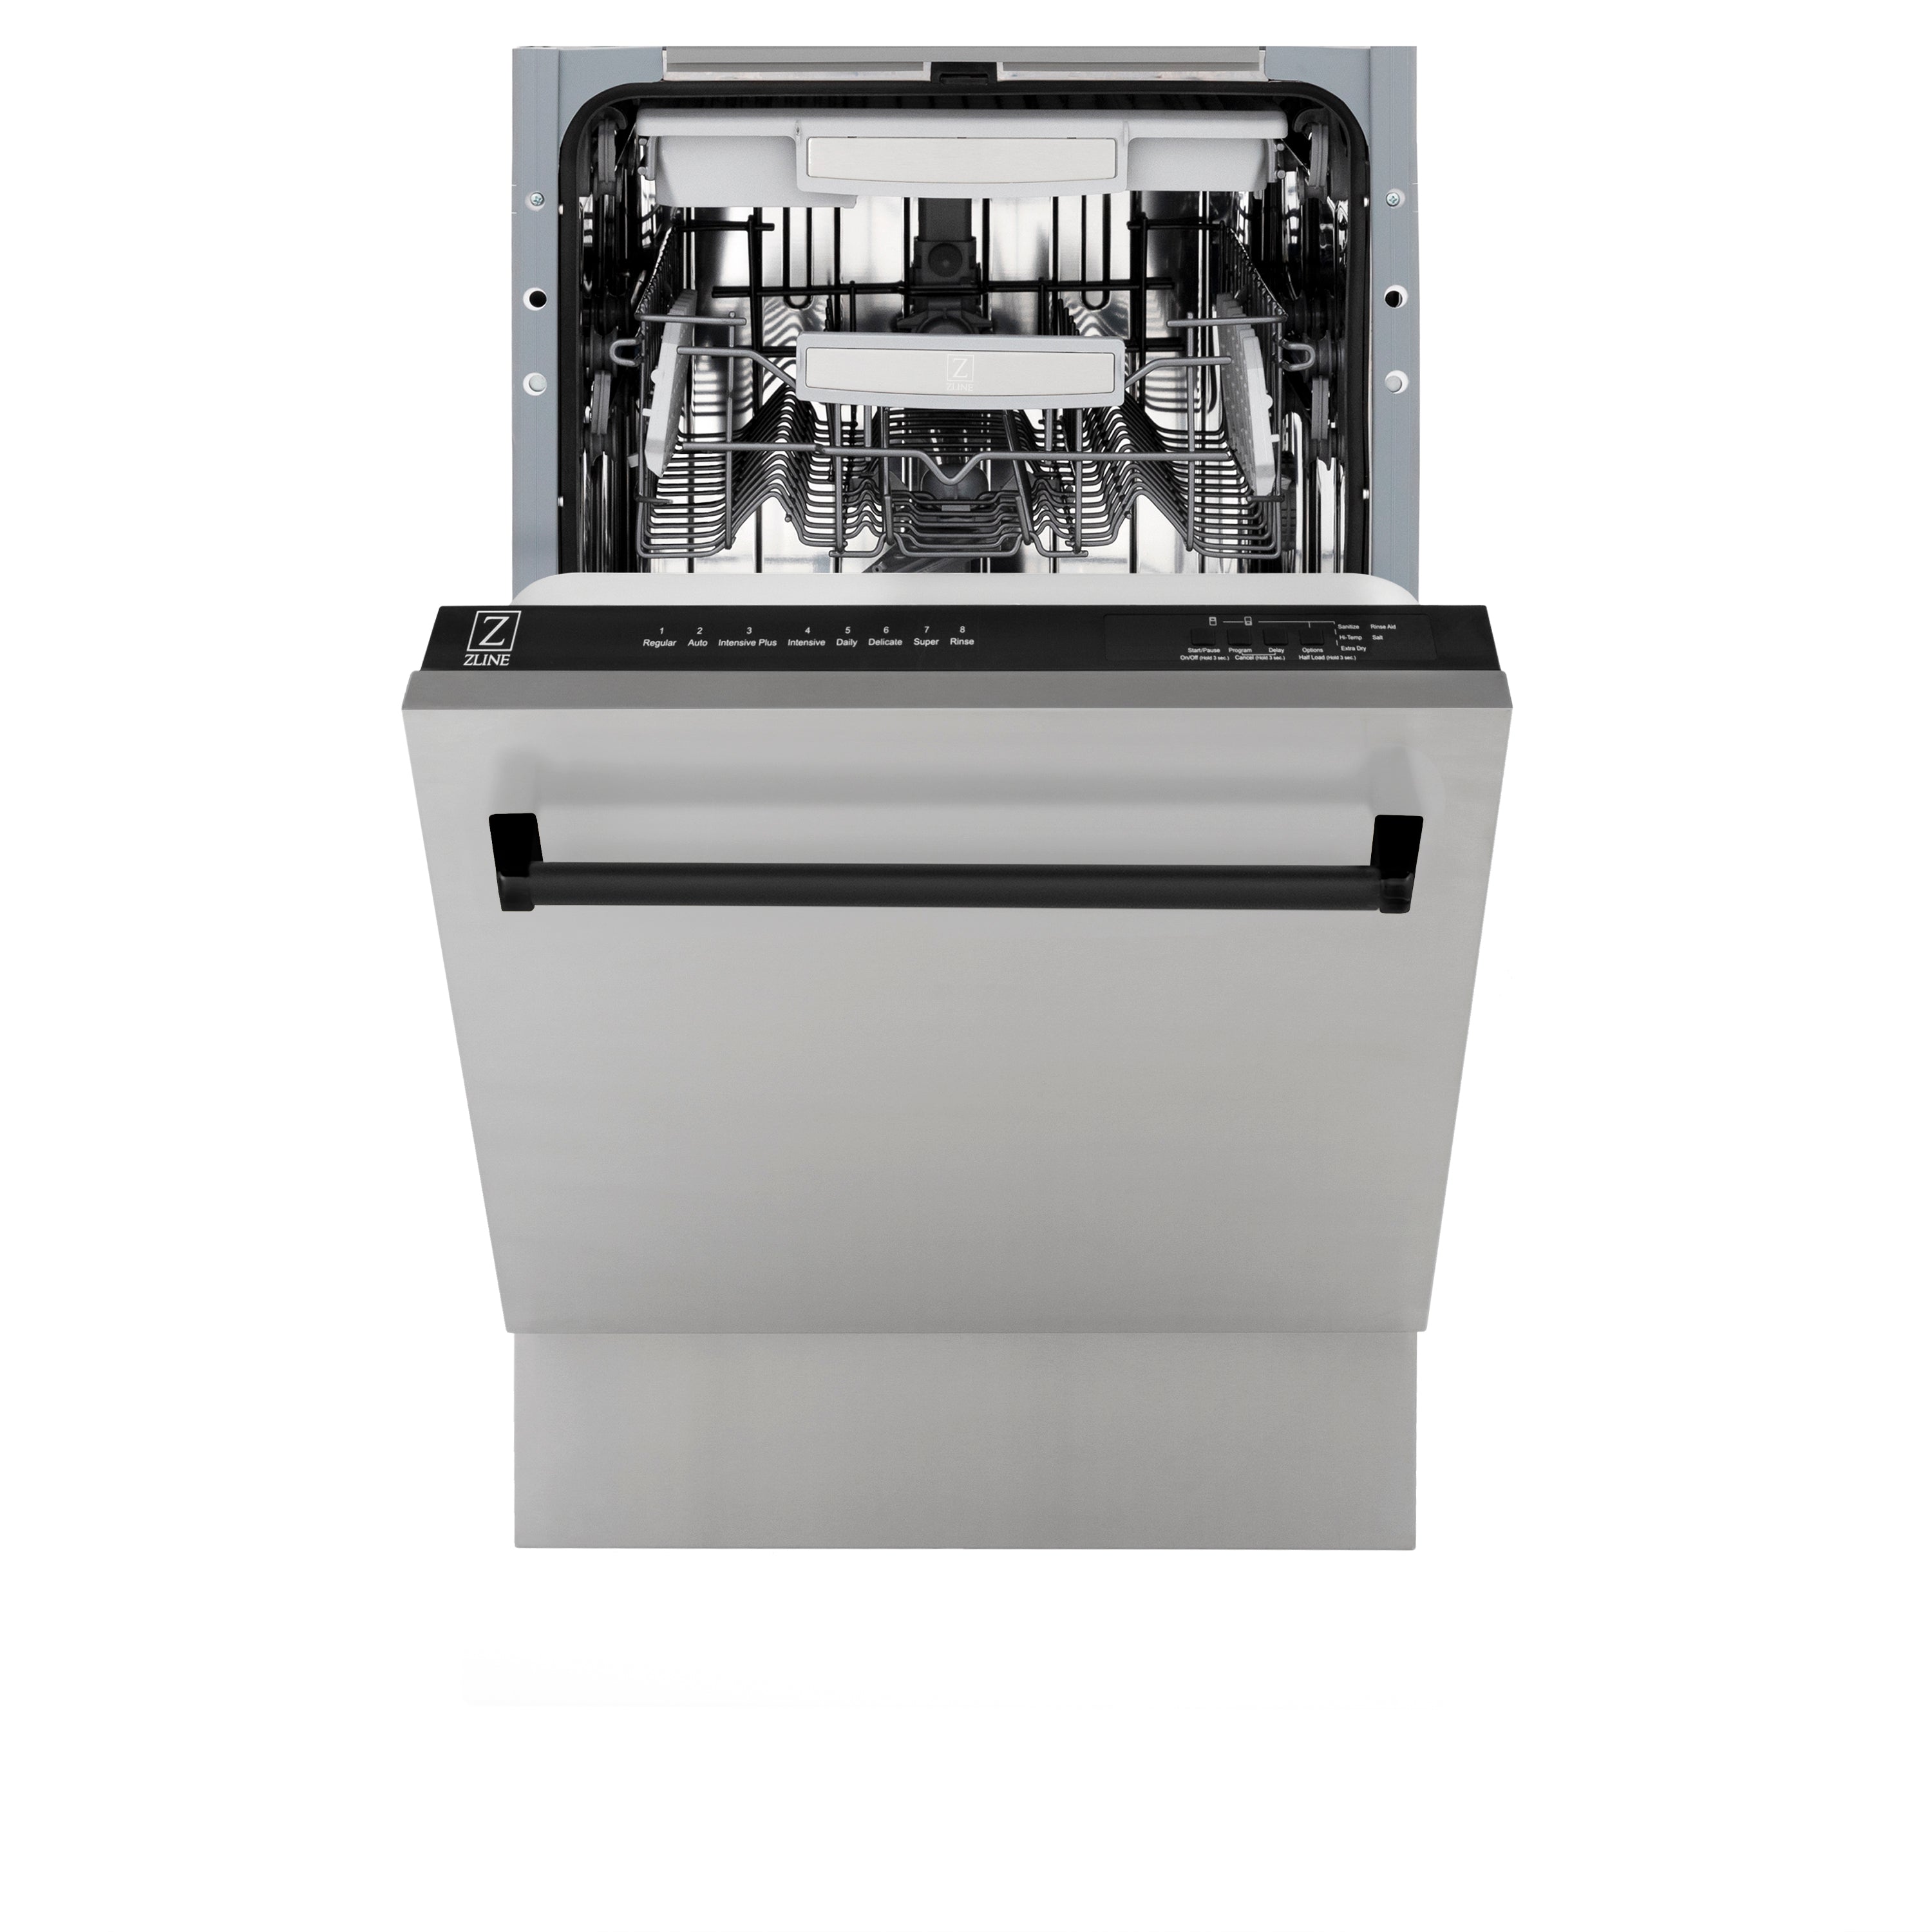 ZLINE Autograph Edition 18” Compact 3rd Rack Top Control Built-In Dishwasher in Stainless Steel with Matte Black Handle, 51dBa (DWVZ-304-18-MB)